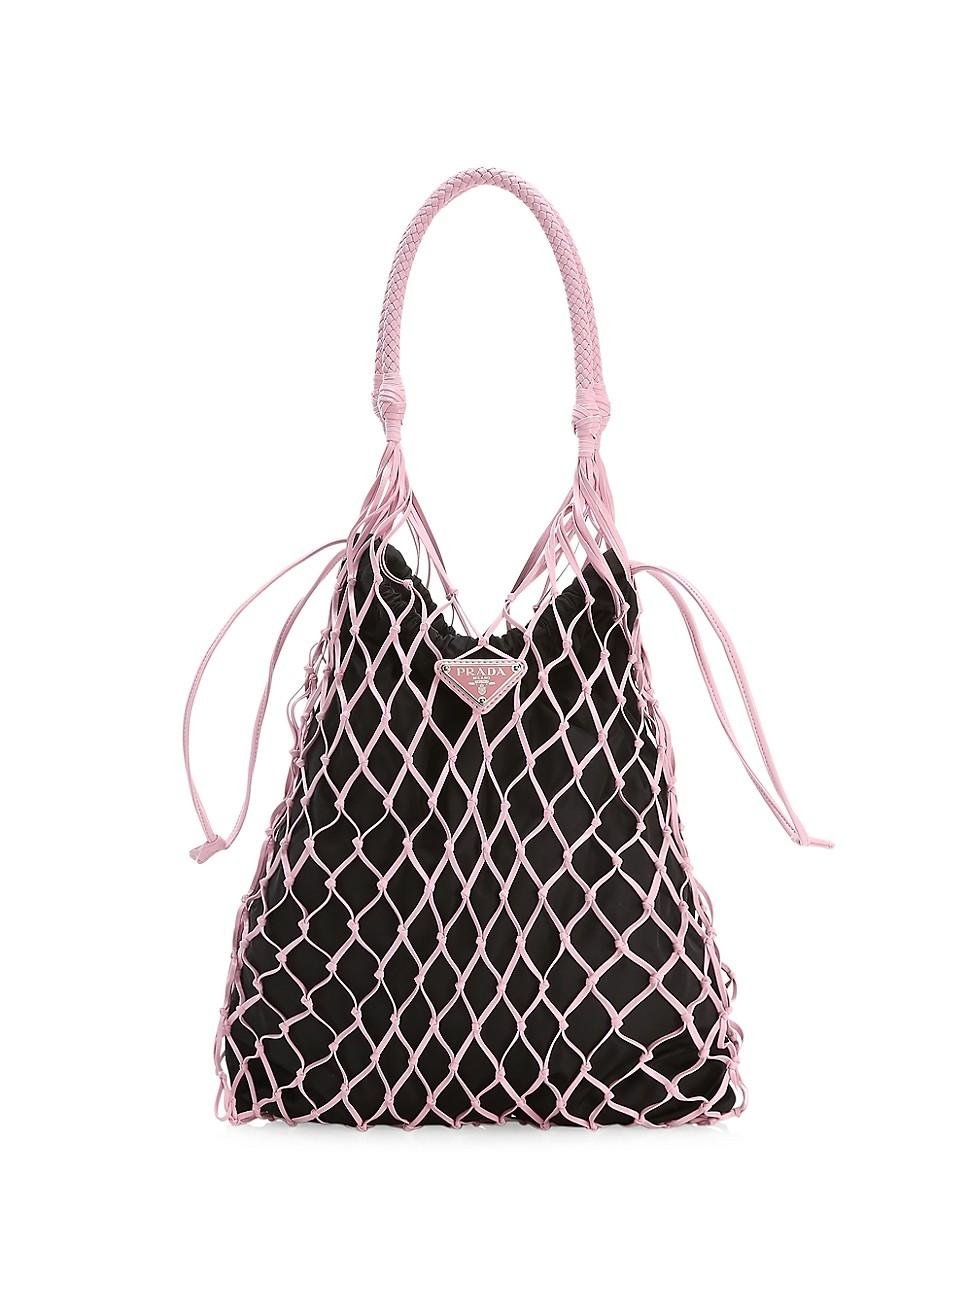 Prada Small Leather Net Bag in Pink | Lyst